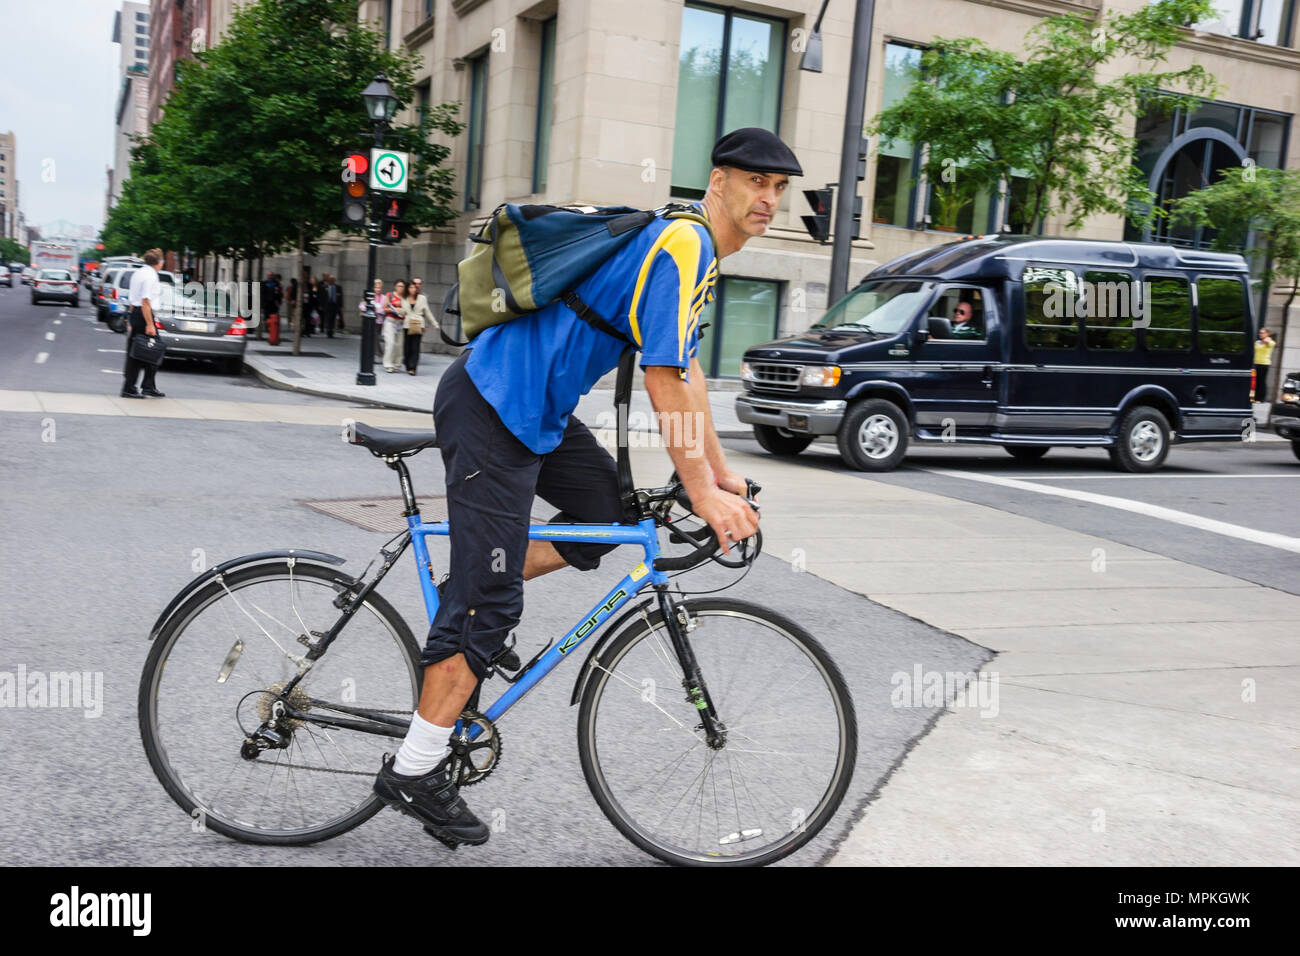 Montreal Canada,Quebec Province,Victoria Square,adult adults man men male, bicycle,bicycling,riding,biking,rider,bike messenger,chapeau,hat,backpack,vi  Stock Photo - Alamy